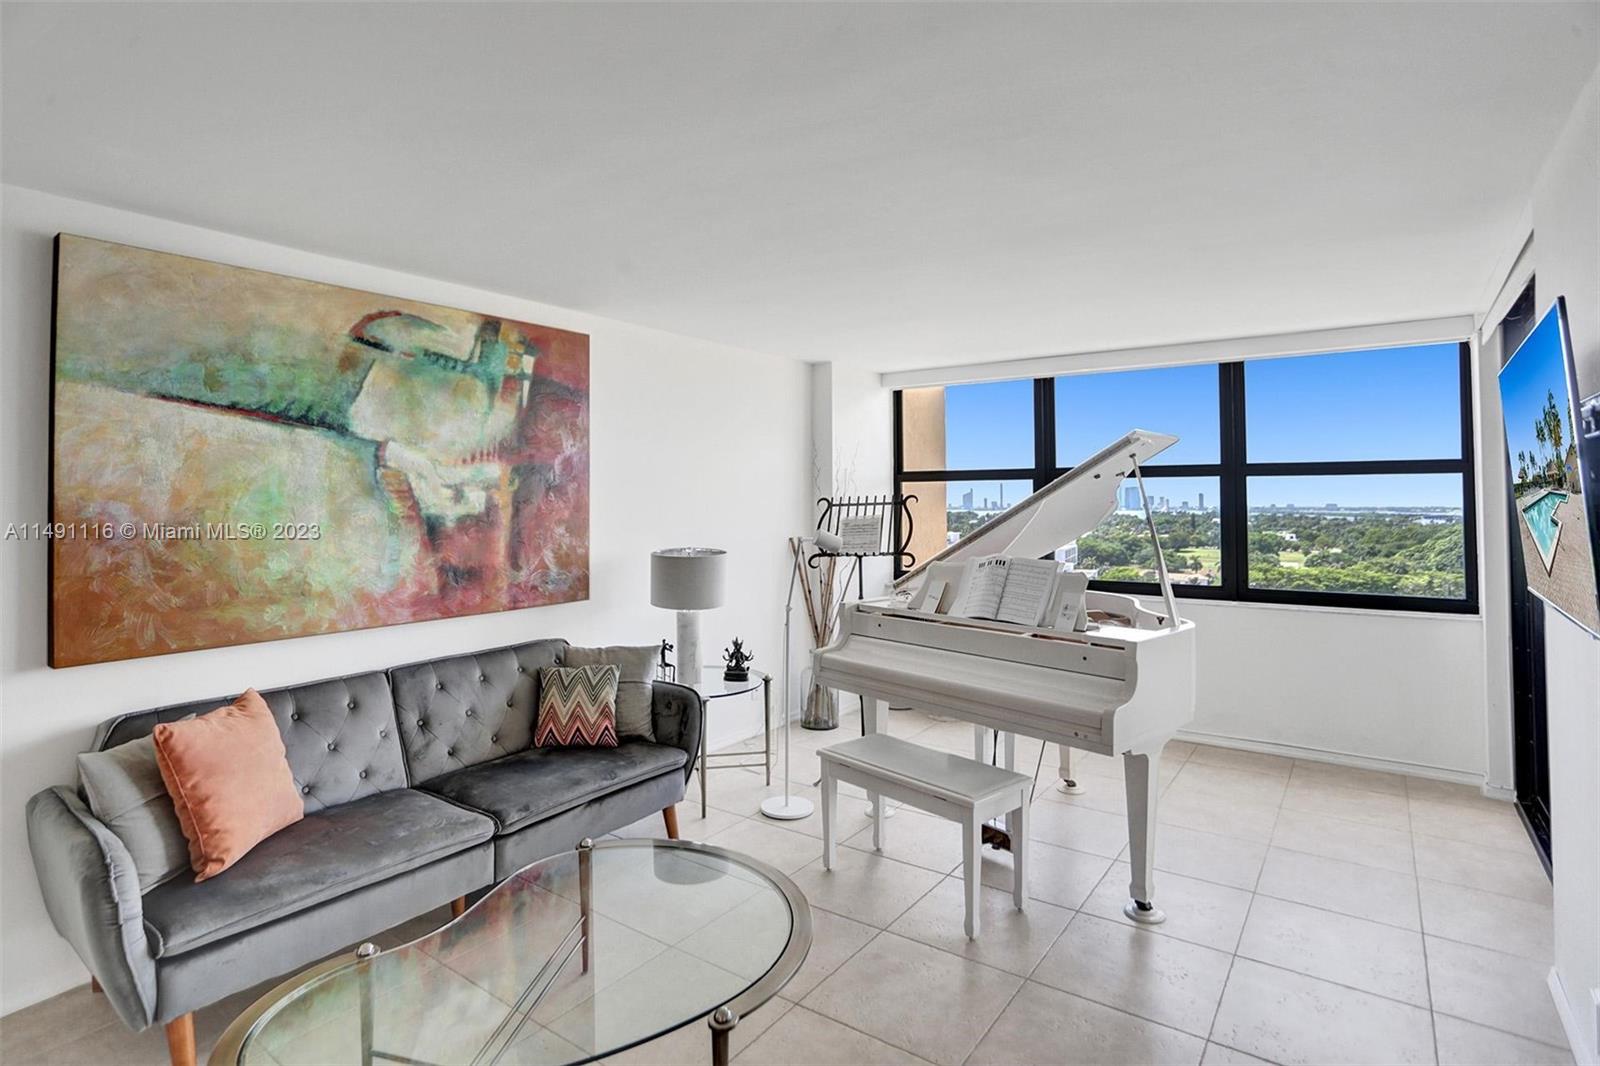 2555 Collins Ave 1508, Miami Beach, Florida 33140, 2 Bedrooms Bedrooms, ,2 BathroomsBathrooms,Residentiallease,For Rent,2555 Collins Ave 1508,A11491116